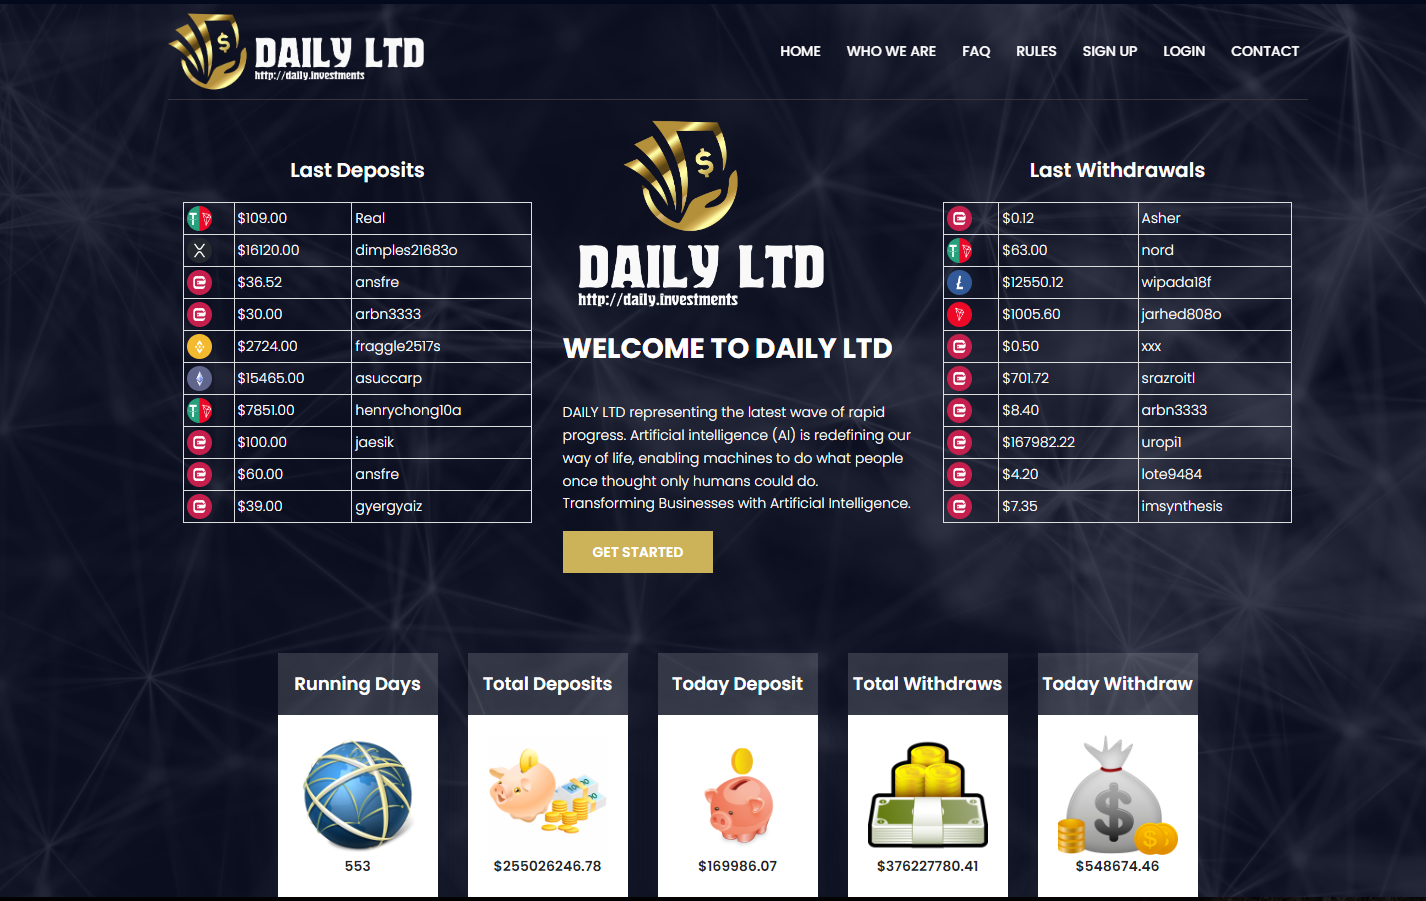 daily.investments review, daily.investments new hyip review,daily.investments scam or paying,daily.investments scam or legit,daily.investments full review details and status,daily.investments payout proof,daily.investments new hyip,daily.investments oxifinance hyip,new hyip,best hyip,legit hyip,top hyip,hourly paying hyip,long term paying hyip,instant paying hyip,best investment project